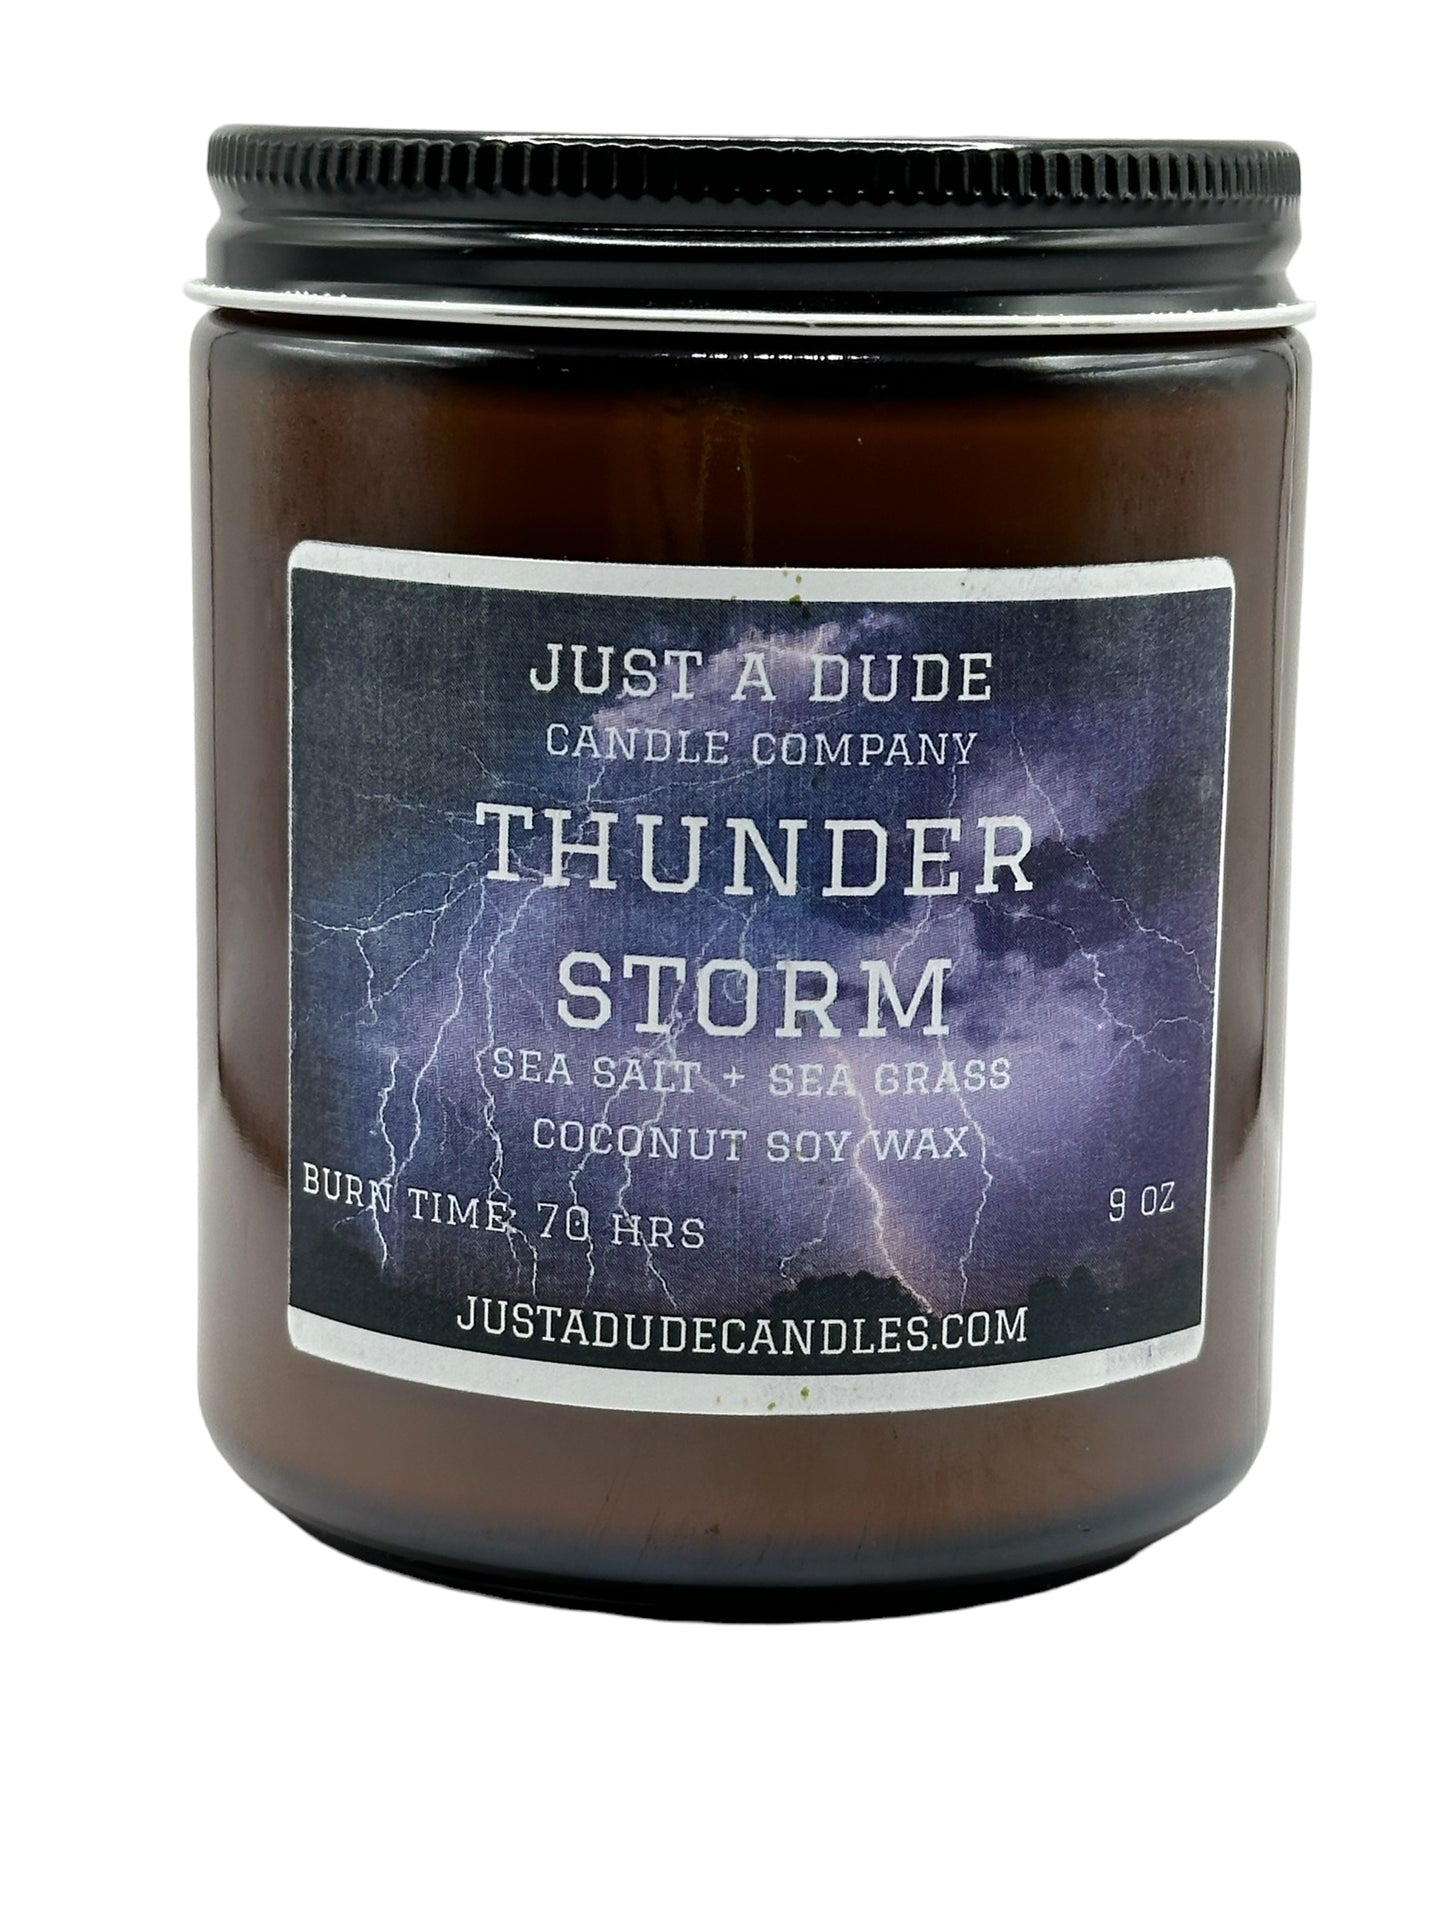 THUNDER STORM (LILY OF THE VALLEY + JASMINE) AMBER JAR COLLECTION